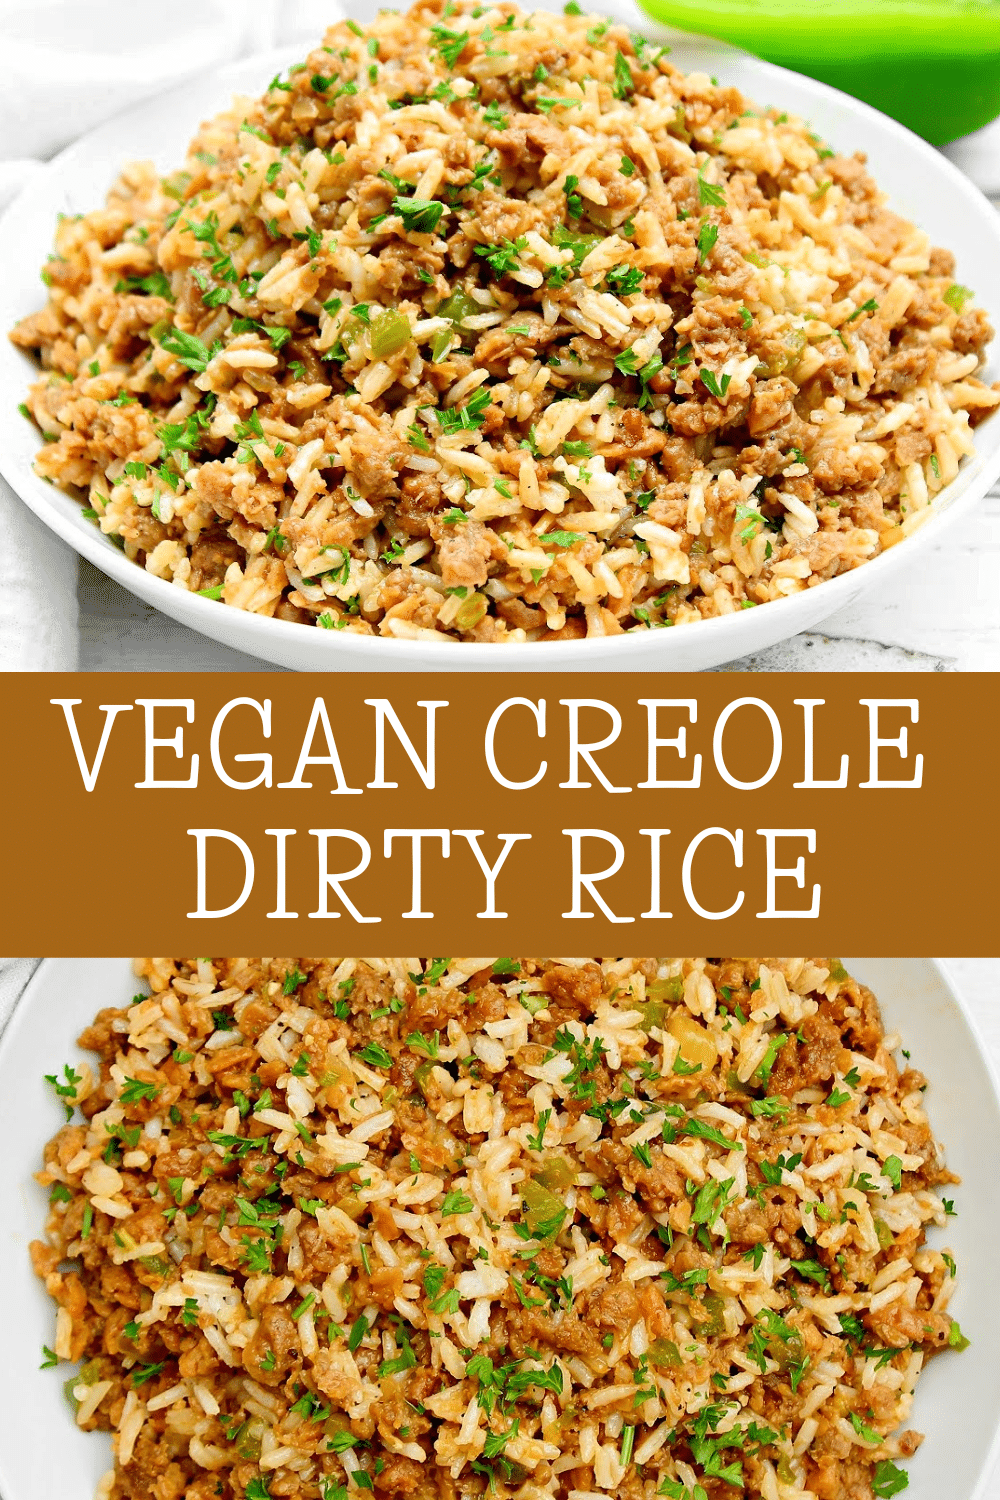 Dirty Rice ~ Bring a taste of New Orleans to the table! This Creole-style dish is packed with strong, spicy, and rich flavors of Louisiana. via @thiswifecooks